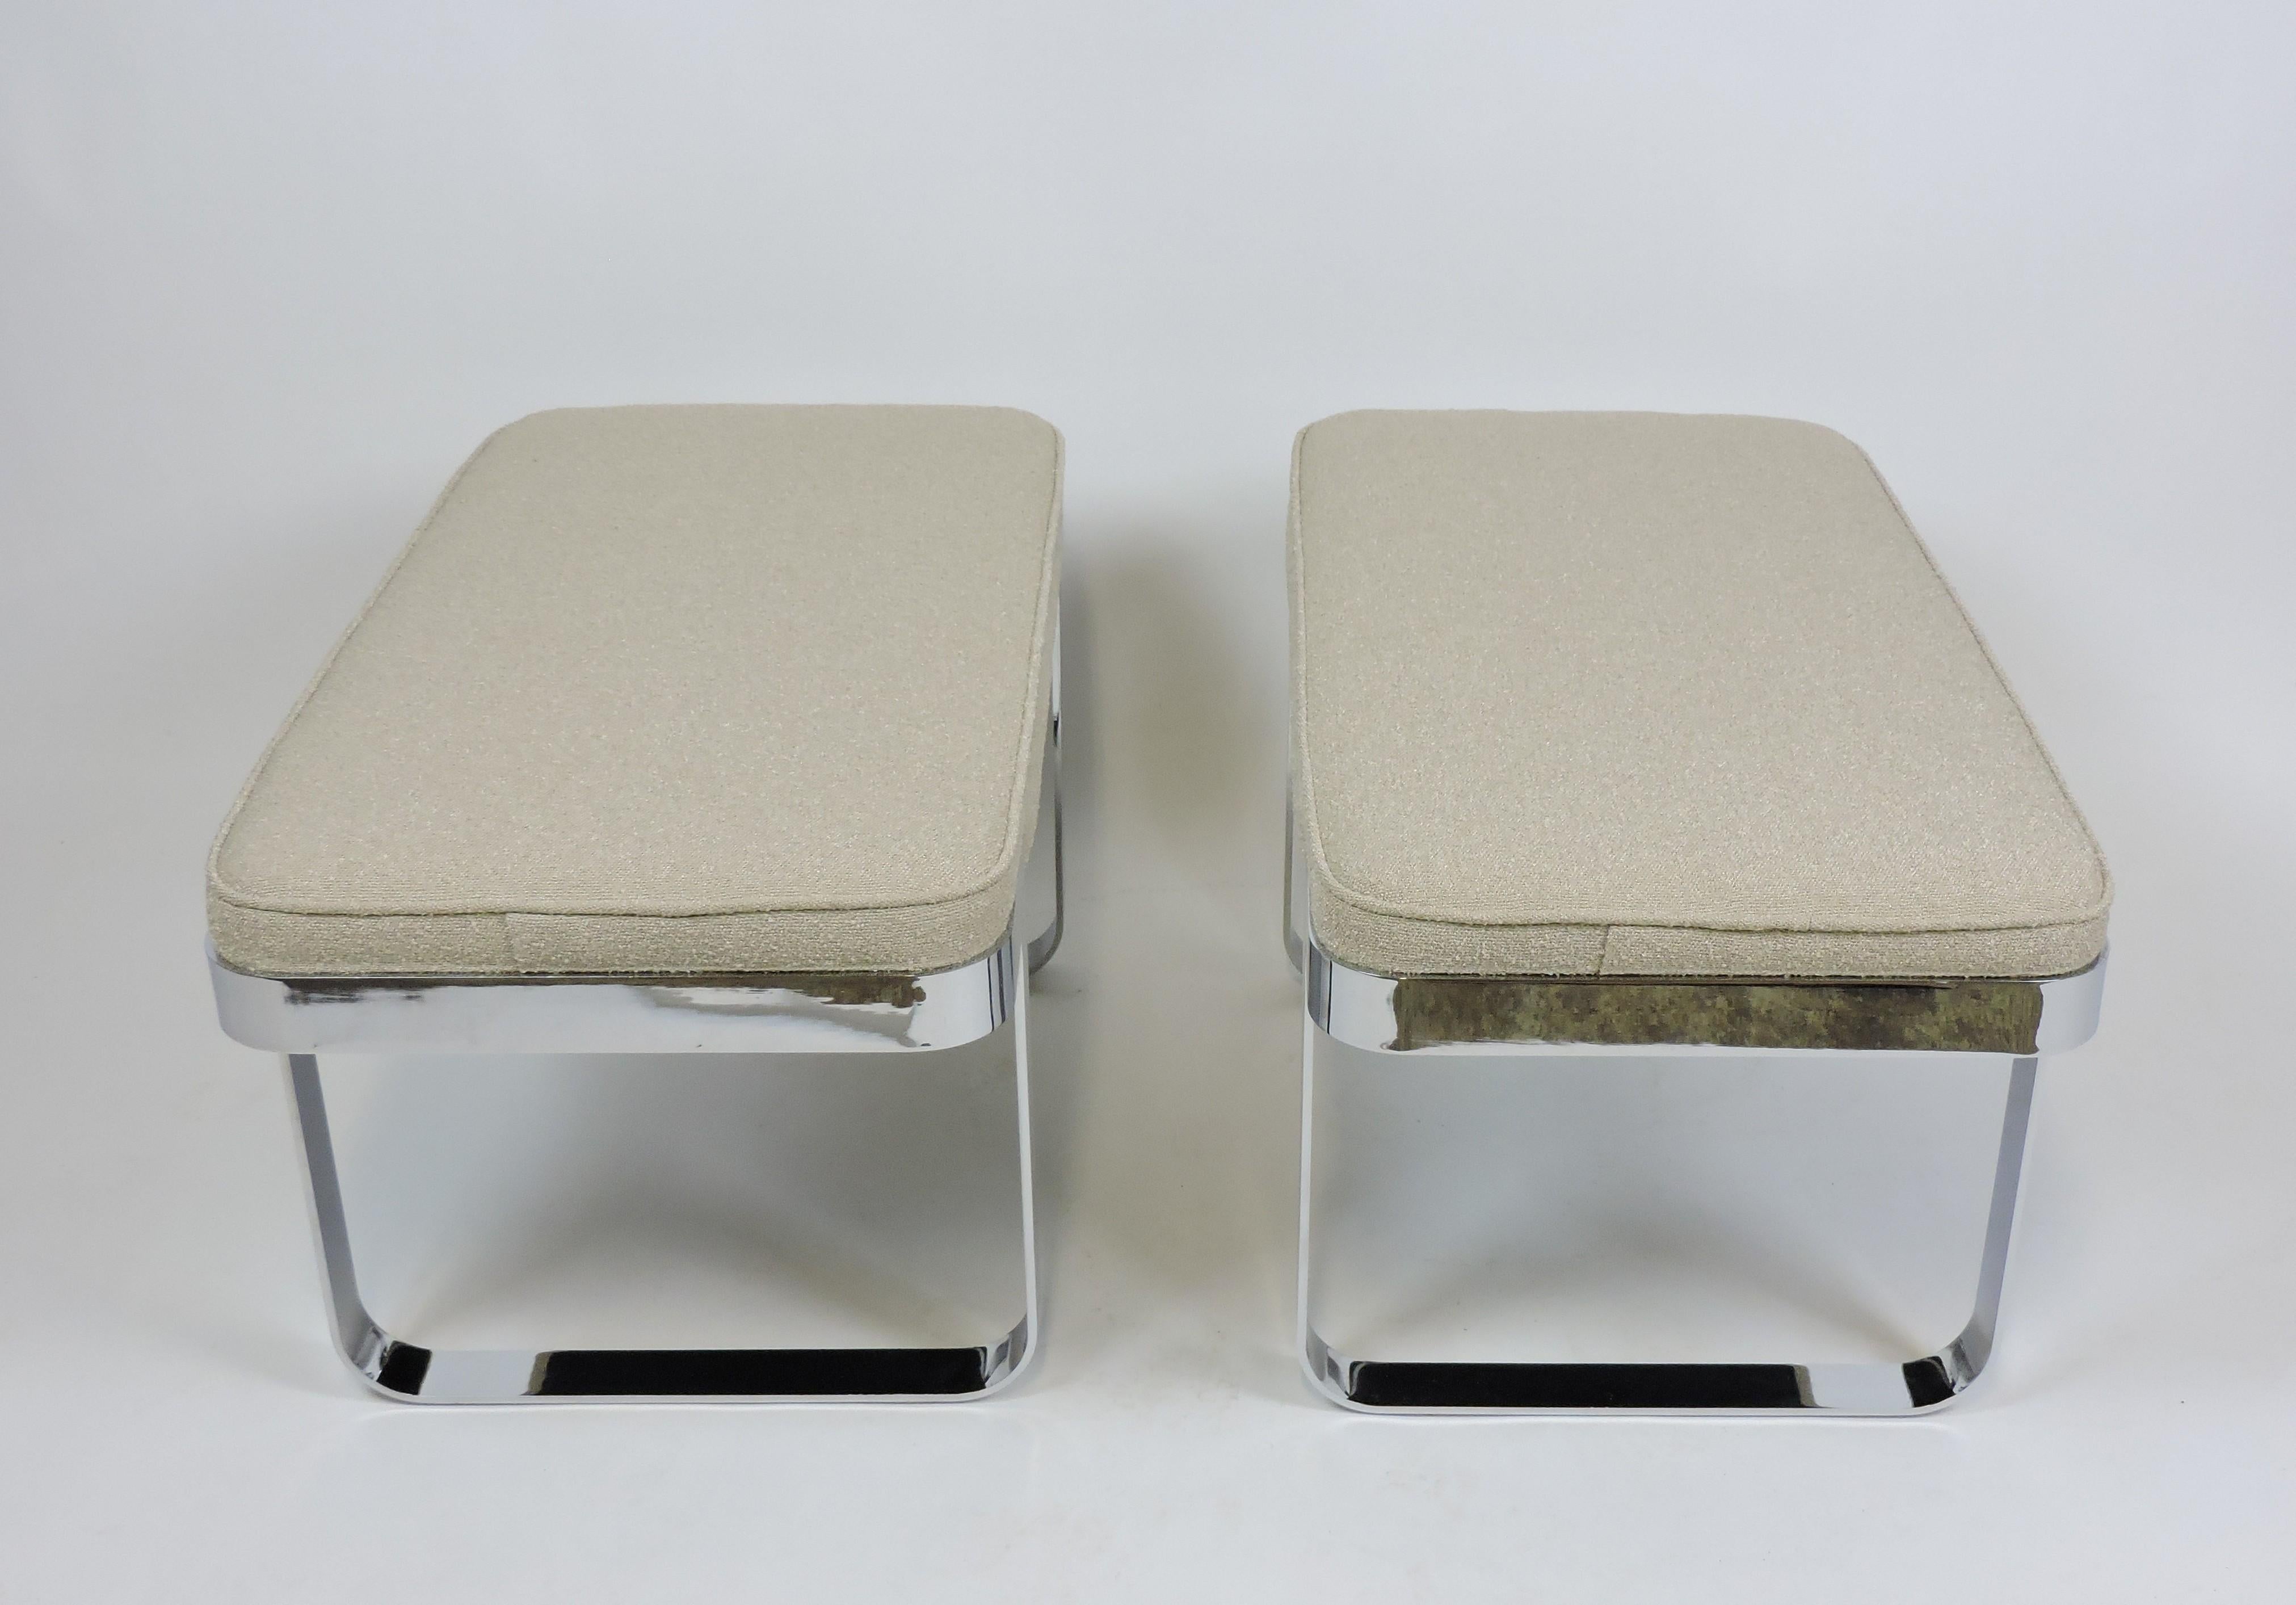 American Mid-Century Modern Milo Baughman Style Chrome Benches by Tri-Mark Designs